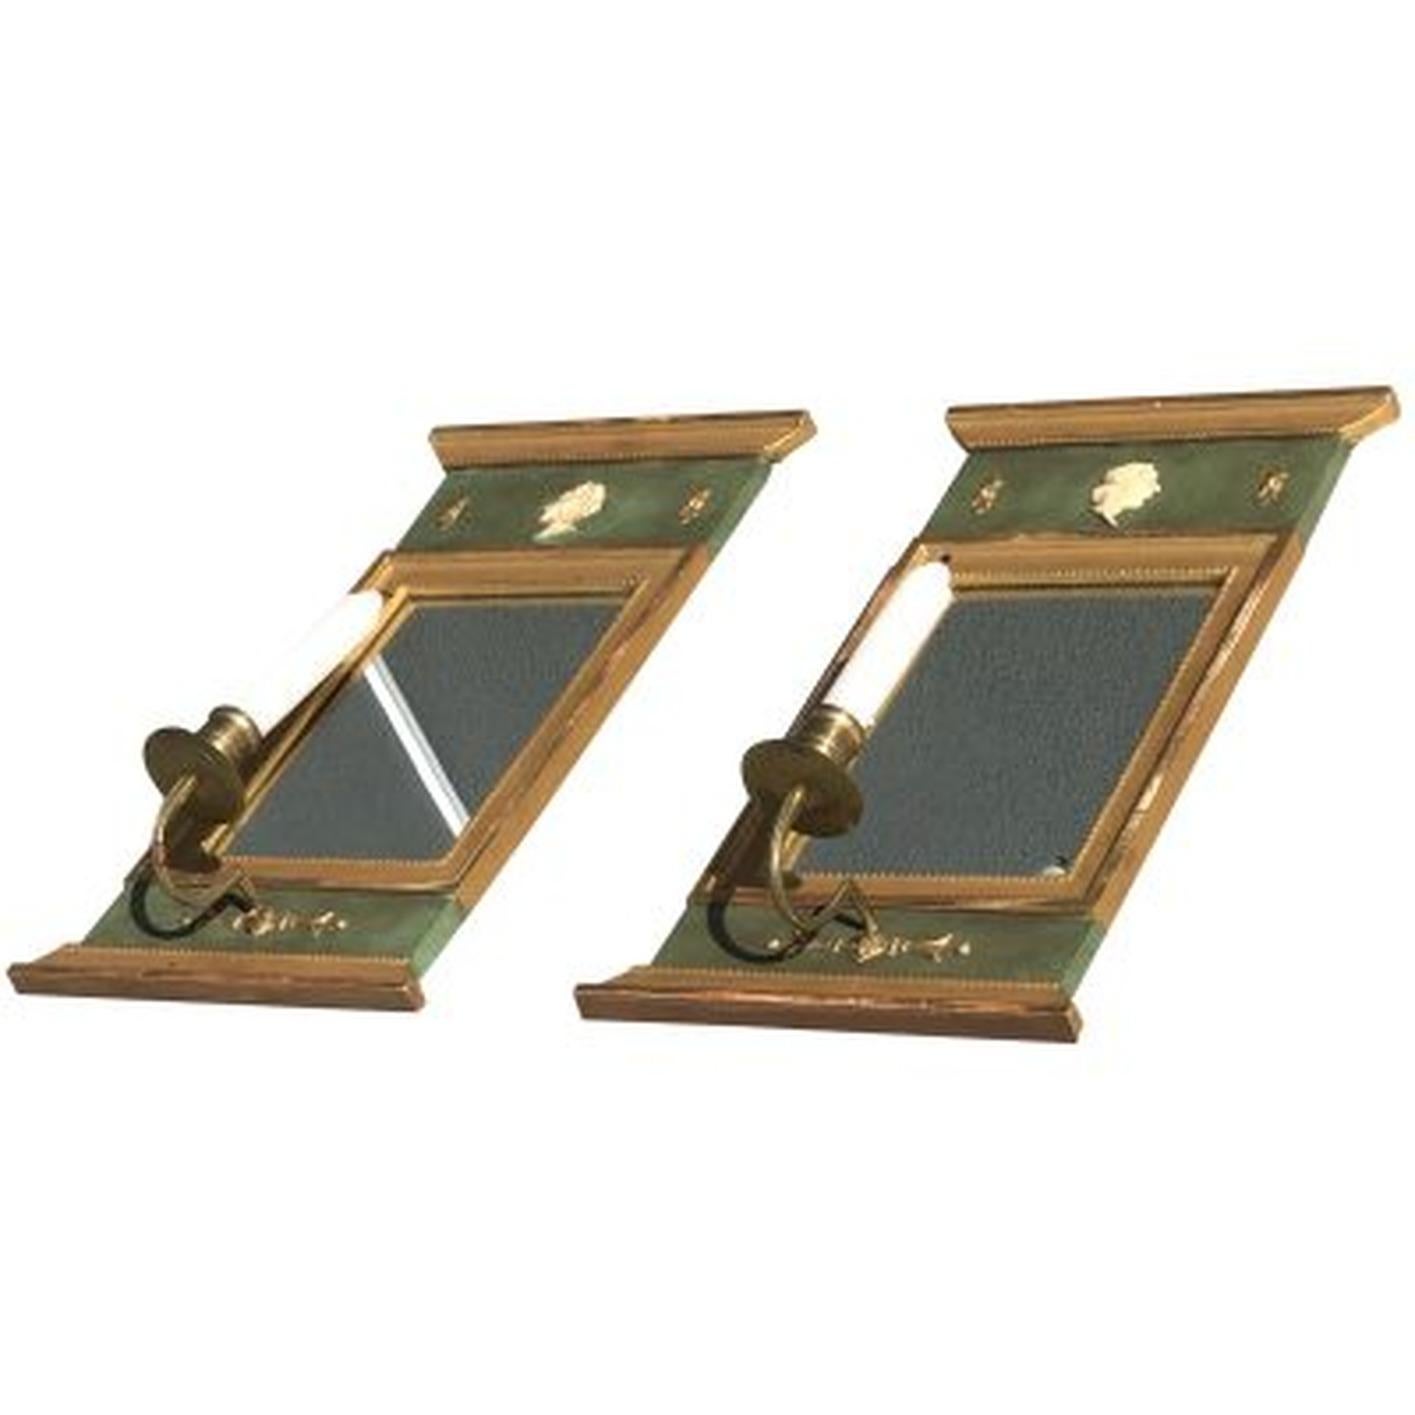 A vintage Art Deco pair of Swedish Gustavian wall sconces made of hand crafted wood and brass, the original glass is in good condition. The pair is partially gilded, composed with a mirror and with one candle cup each, signed by Kurt Ekvall. Wear